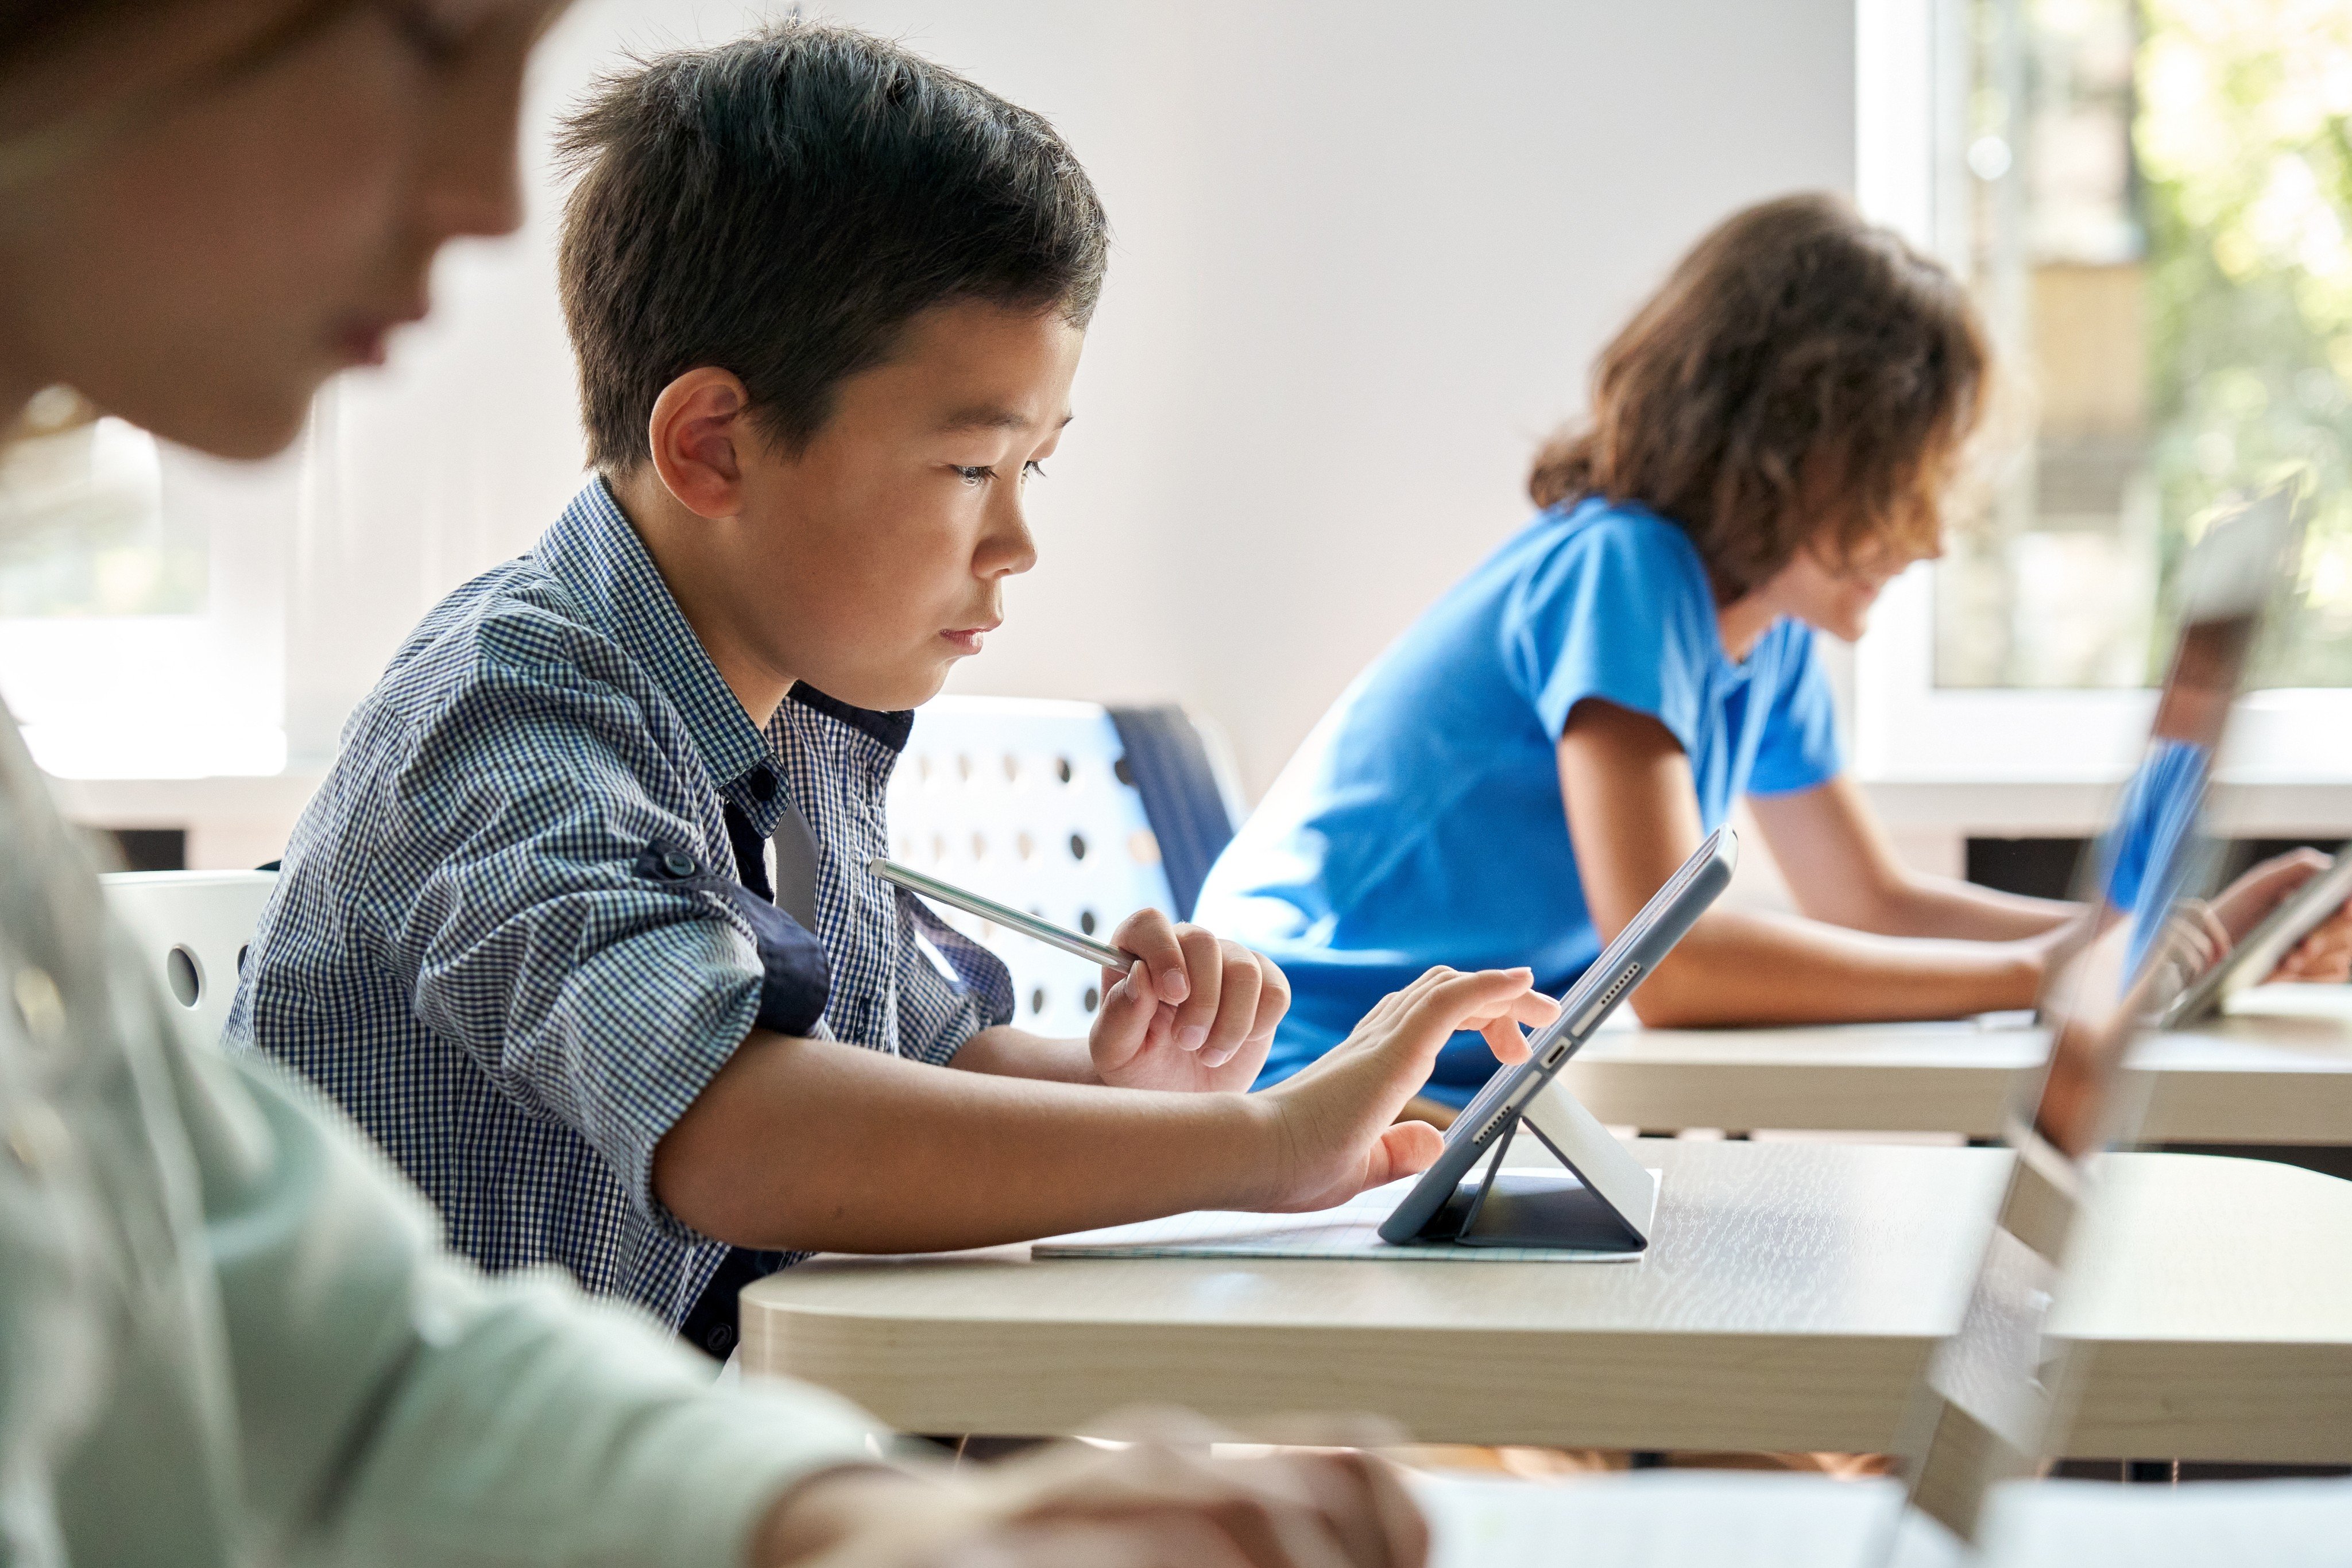 We should be limiting screen time, not encouraging it. Ed-tech has never been convincingly shown to have any benefit over “traditional” education methods in producing results. Photo: Shutterstock